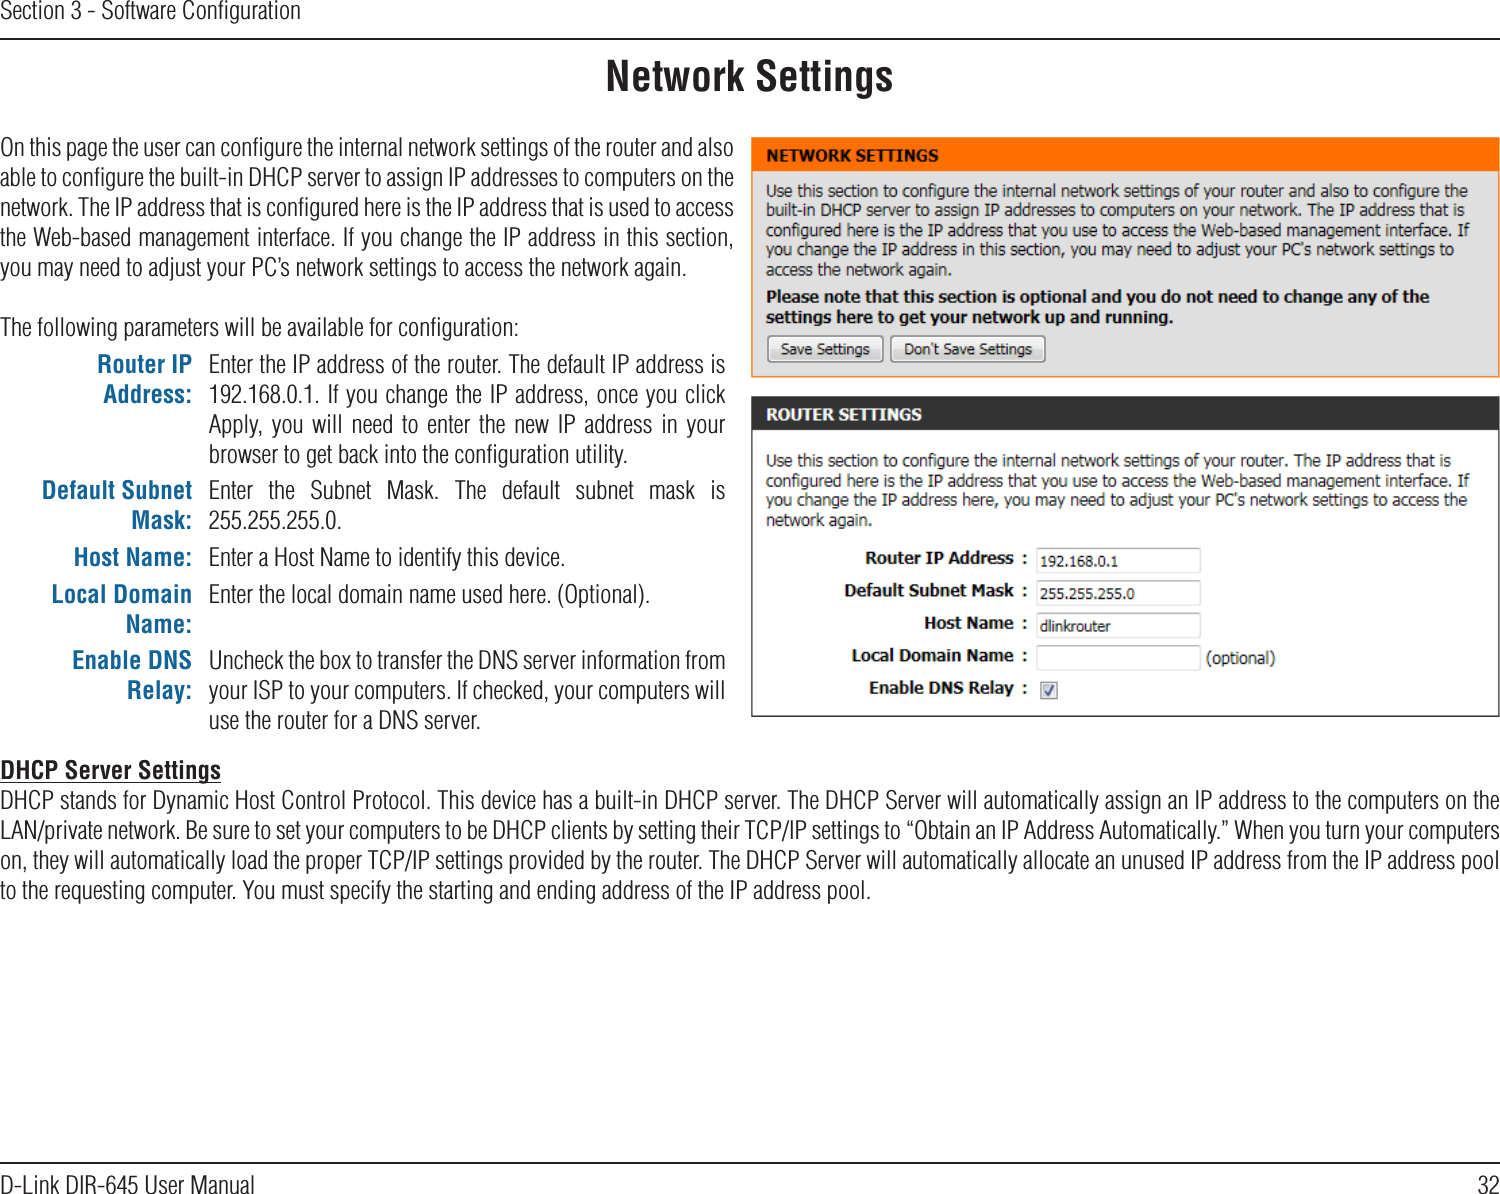 32D-Link DIR-645 User ManualSection 3 - Software ConﬁgurationNetwork SettingsOn this page the user can conﬁgure the internal network settings of the router and also able to conﬁgure the built-in DHCP server to assign IP addresses to computers on the network. The IP address that is conﬁgured here is the IP address that is used to access the Web-based management interface. If you change the IP address in this section, you may need to adjust your PC’s network settings to access the network again.The following parameters will be available for conﬁguration:Router IP Address:Enter the IP address of the router. The default IP address is 192.168.0.1. If you change the IP address, once you click Apply,  you  will  need  to  enter  the  new  IP  address  in  your browser to get back into the conﬁguration utility.Default Subnet Mask:Enter  the  Subnet  Mask.  The  default  subnet  mask  is 255.255.255.0.Host Name: Enter a Host Name to identify this device.Local Domain Name:Enter the local domain name used here. (Optional).Enable DNS Relay:Uncheck the box to transfer the DNS server information from your ISP to your computers. If checked, your computers will use the router for a DNS server.DHCP Server SettingsDHCP stands for Dynamic Host Control Protocol. This device has a built-in DHCP server. The DHCP Server will automatically assign an IP address to the computers on the LAN/private network. Be sure to set your computers to be DHCP clients by setting their TCP/IP settings to “Obtain an IP Address Automatically.” When you turn your computers on, they will automatically load the proper TCP/IP settings provided by the router. The DHCP Server will automatically allocate an unused IP address from the IP address pool to the requesting computer. You must specify the starting and ending address of the IP address pool.